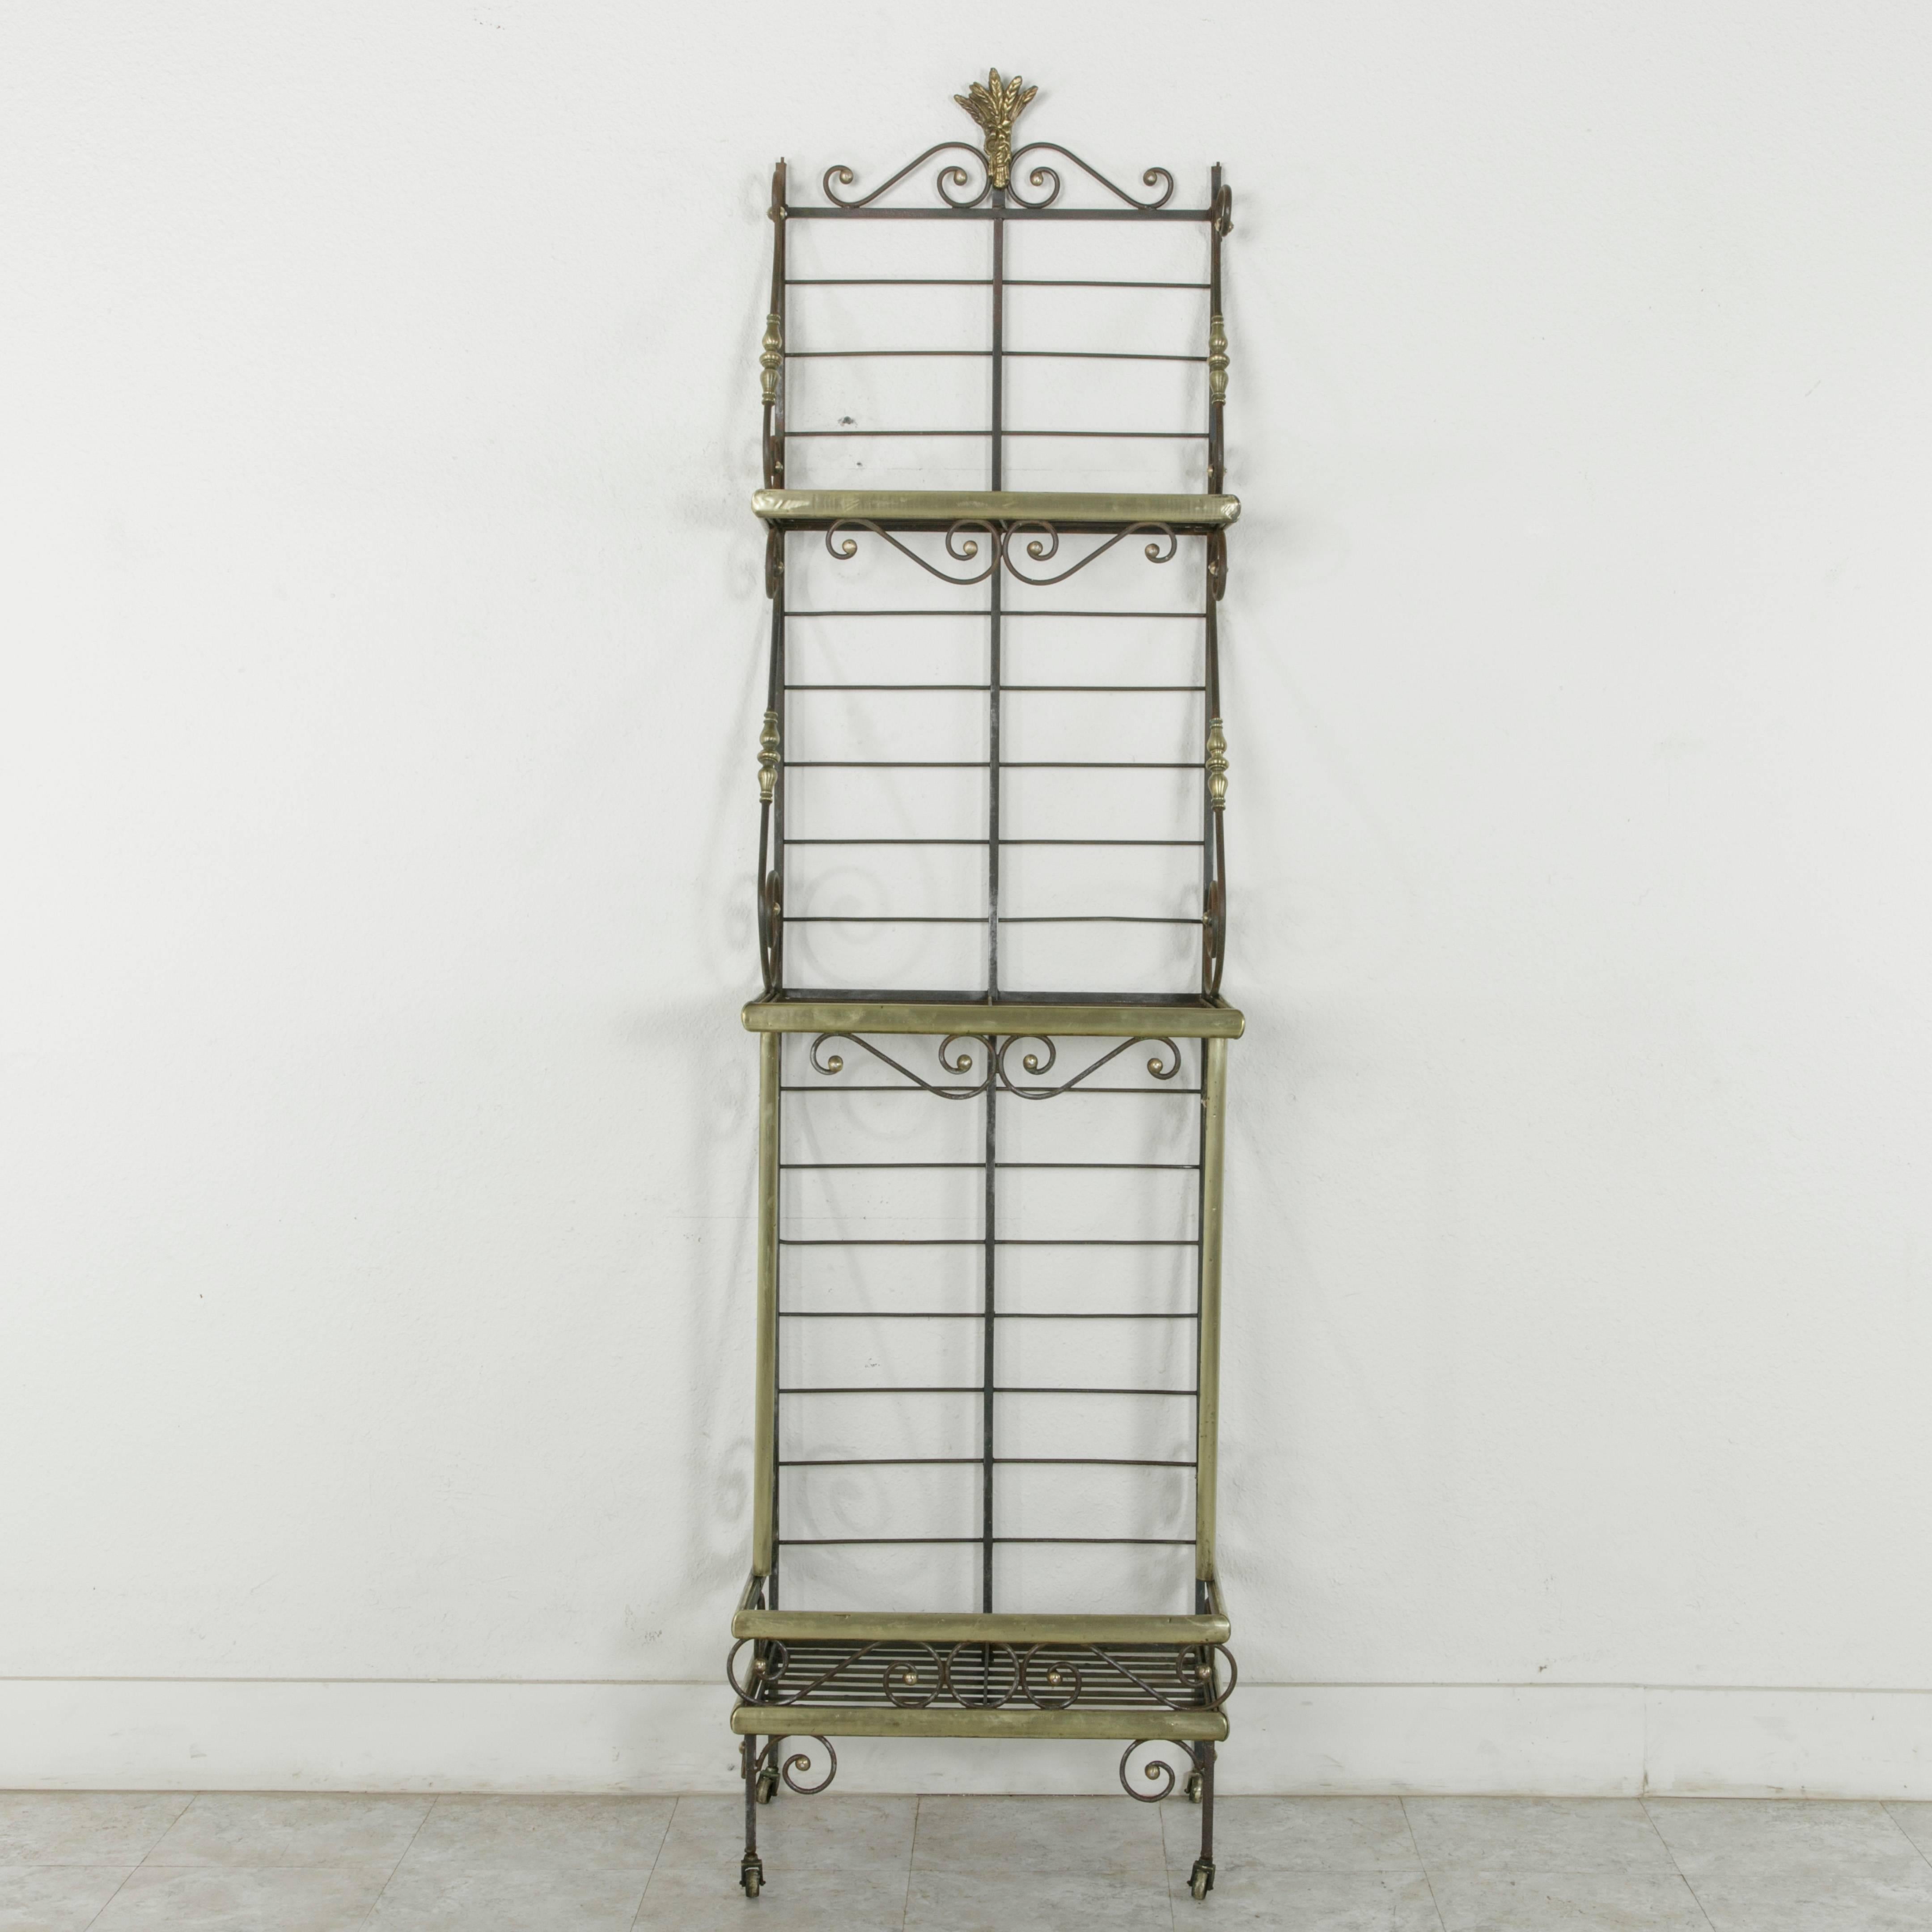 A rare find in a unique small scale, this French iron baker's rack from Normandy is trimmed in brass around each of its three shelves. The shelves are joined by scrolling iron detailed with brass turnings that lend support as well as an aesthetic